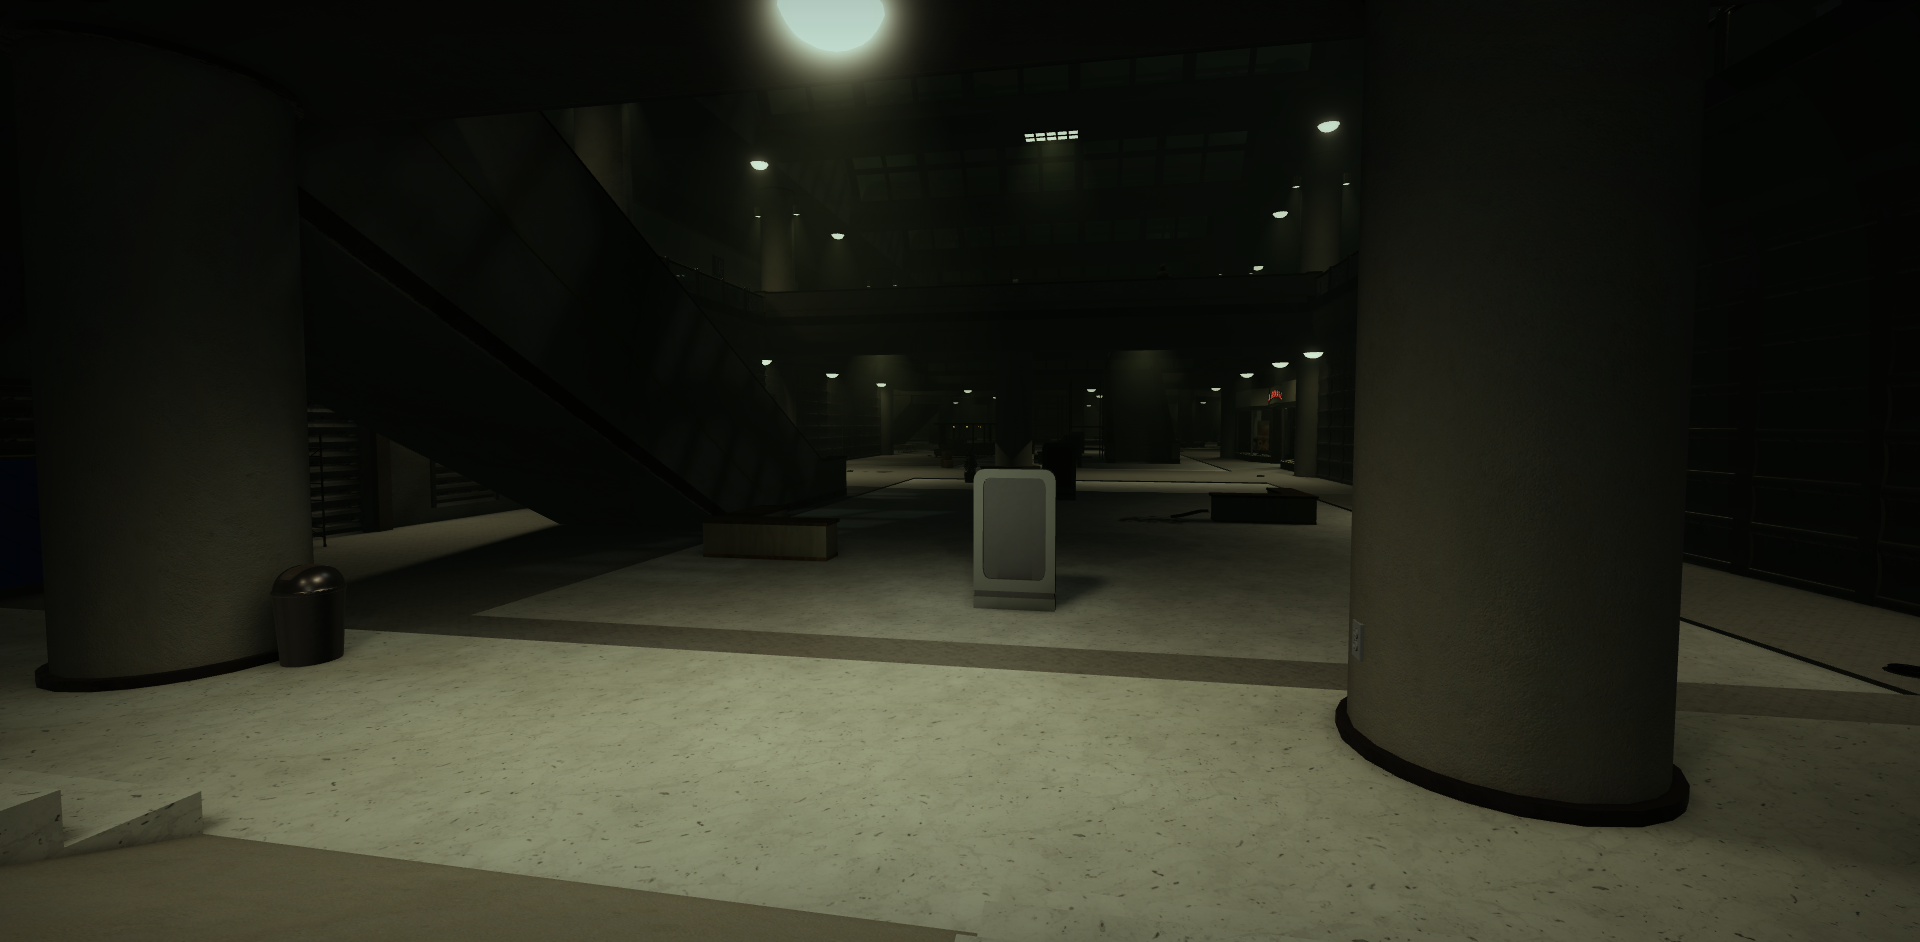 18 Mall - Apeirophobia Levels Explained #roblox #robloxbackrooms #apei, backrooms levels